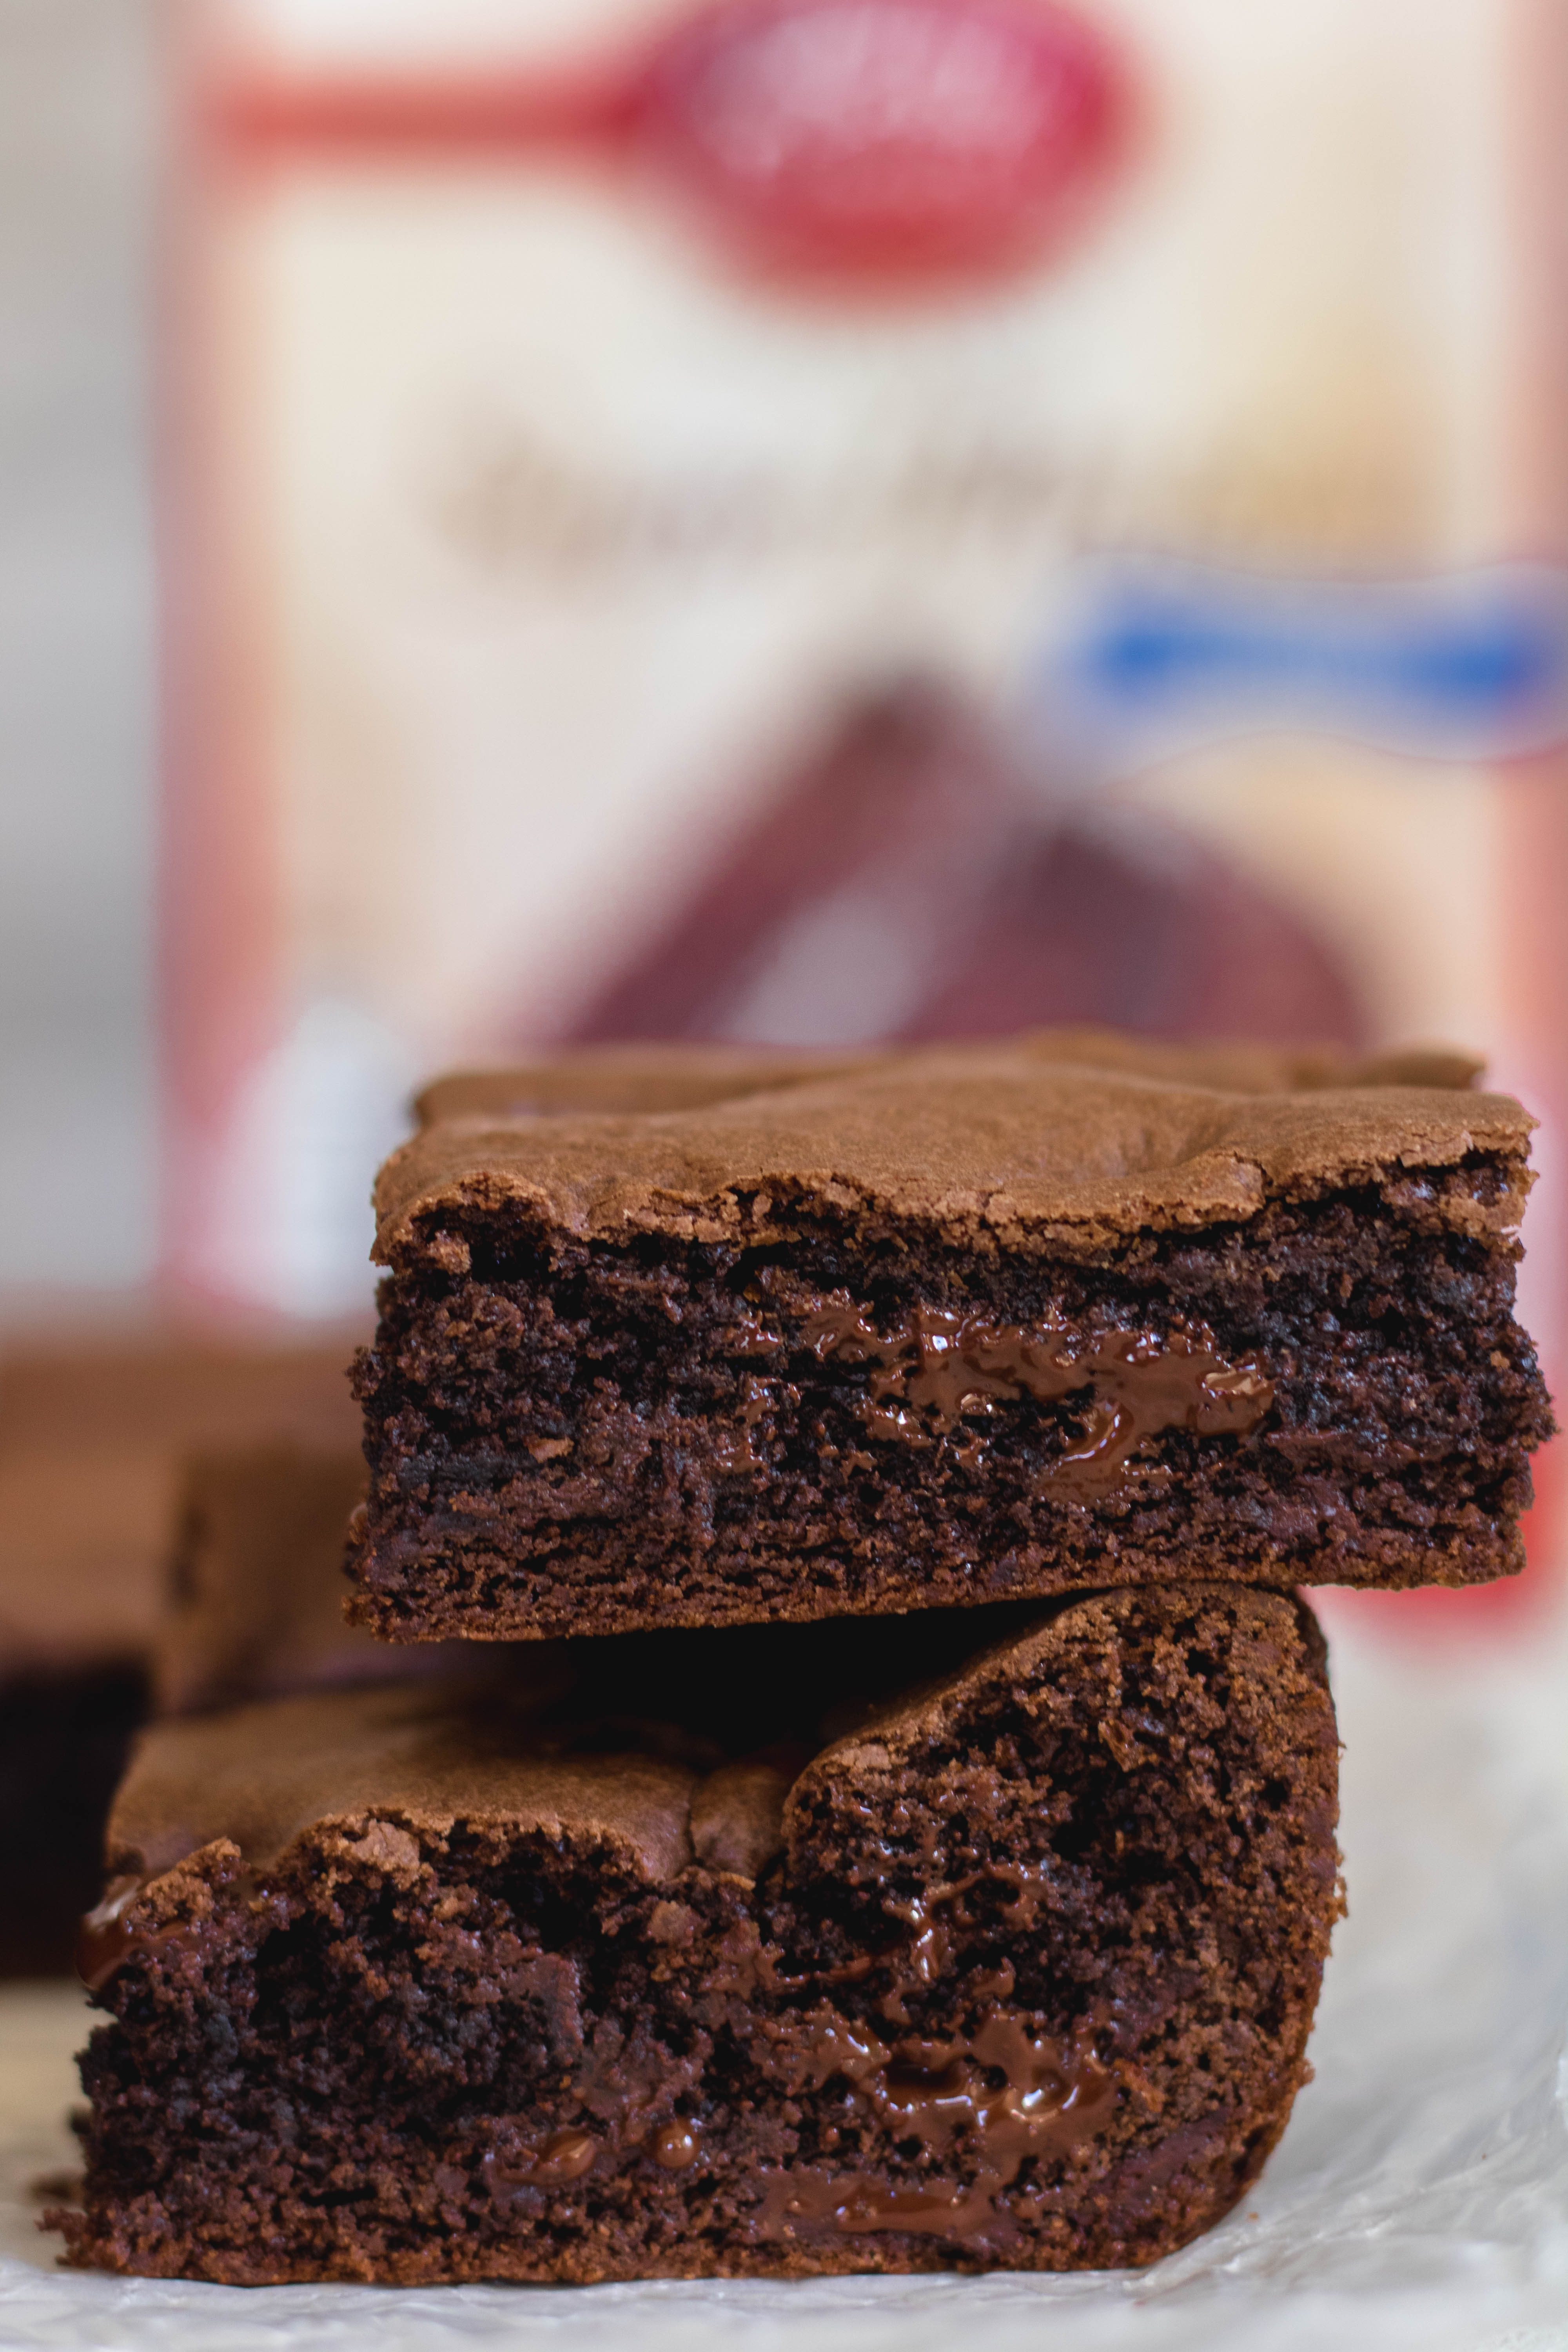 Chocolate cake mix brownies with chocolate centers